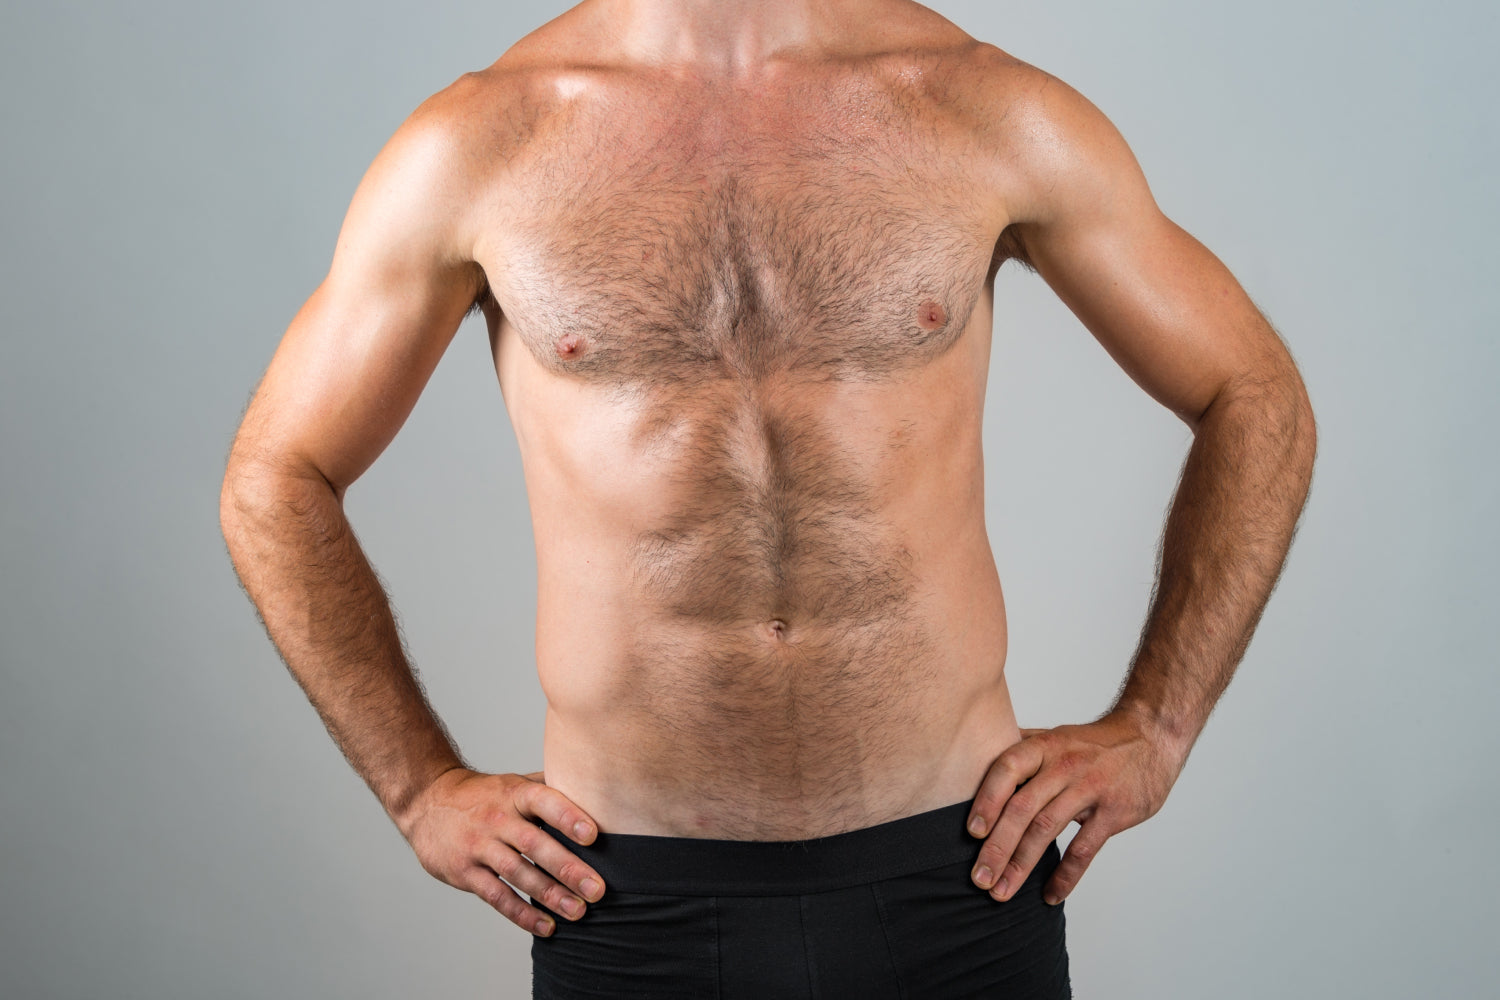 How To Trim Chest and Stomach Hair: Grooming Guide for Men